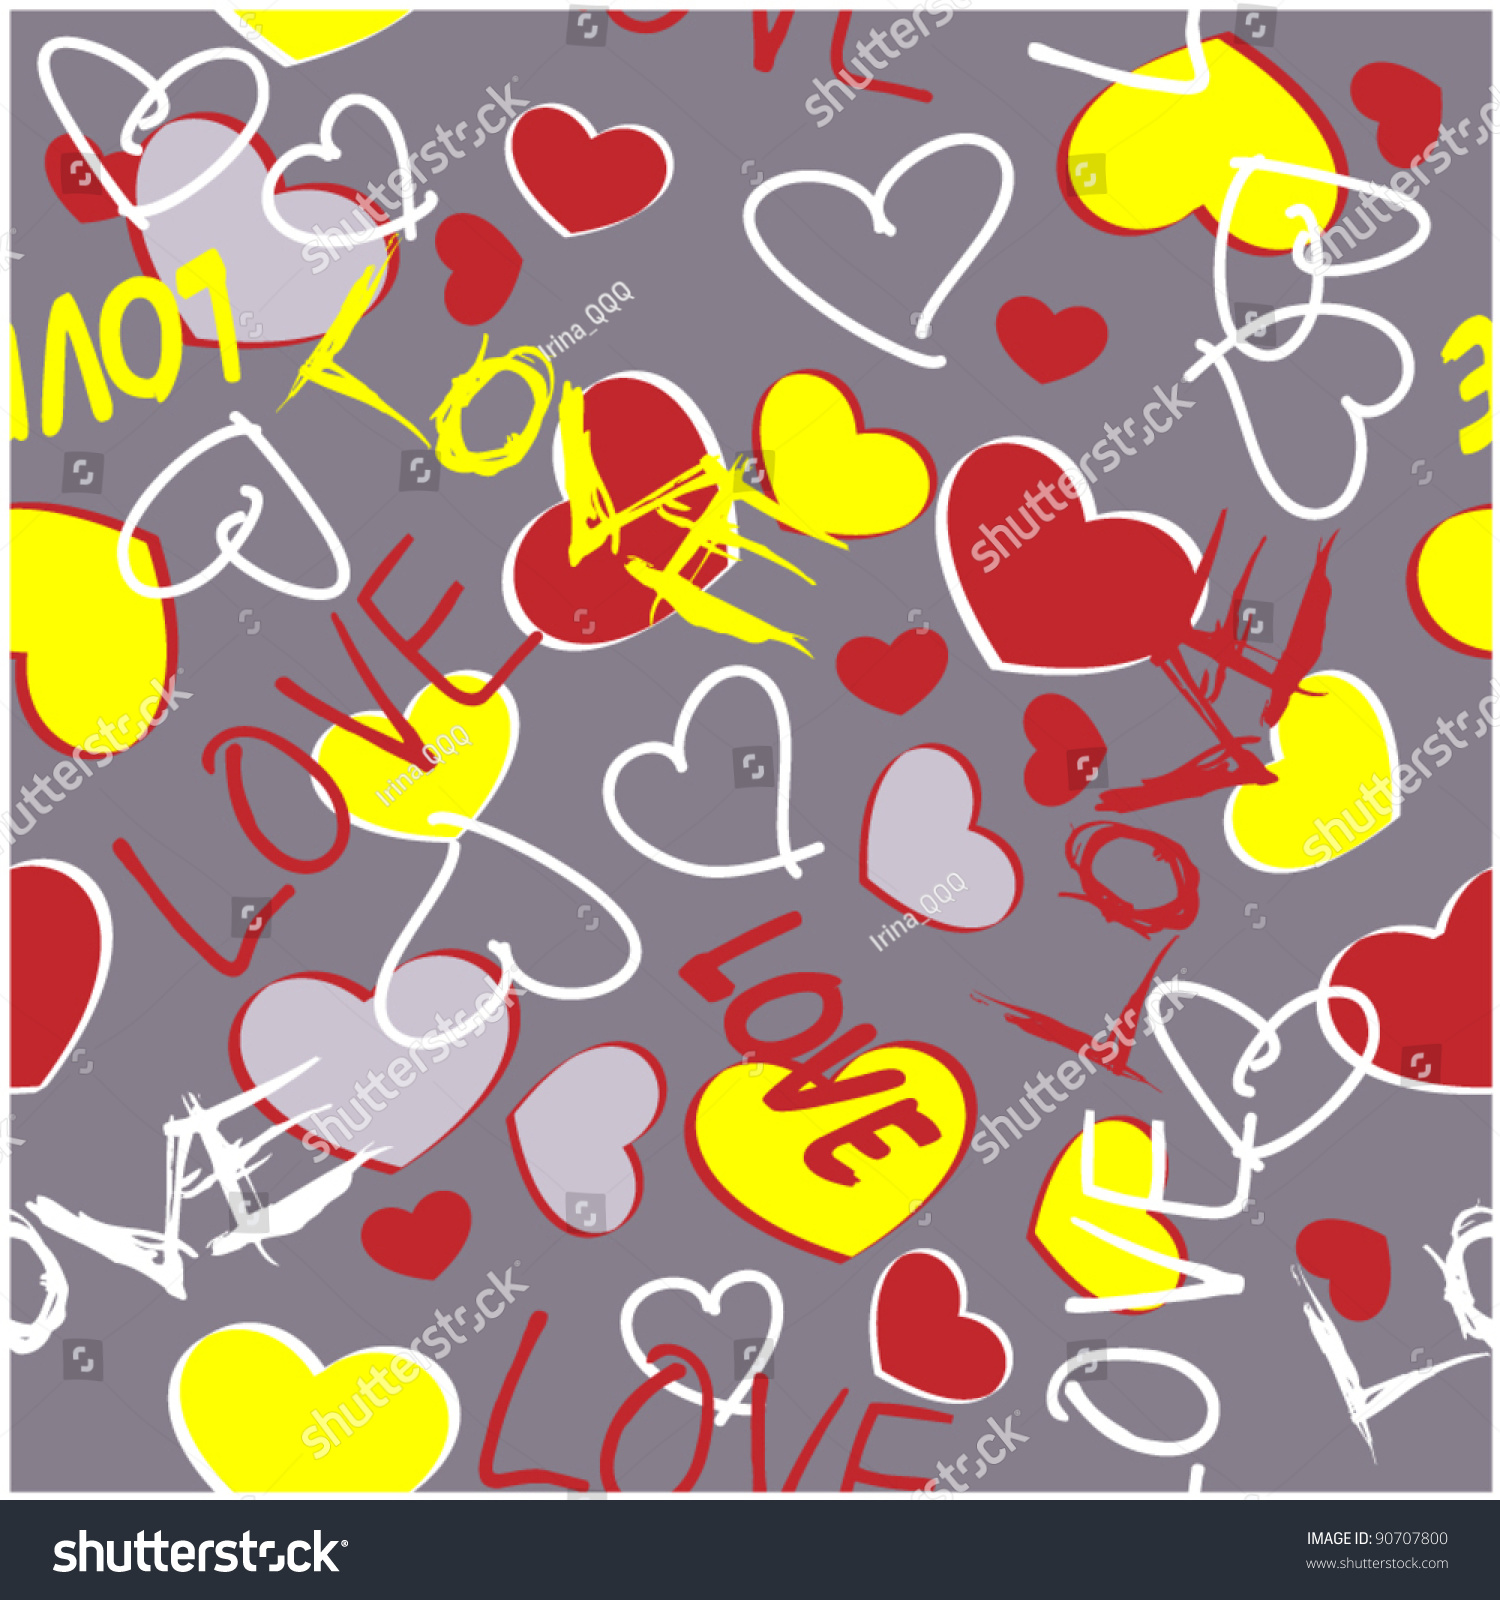 Art Seamless Hearts Background Stock Vector Royalty Free 90707800 Shutterstock 0412